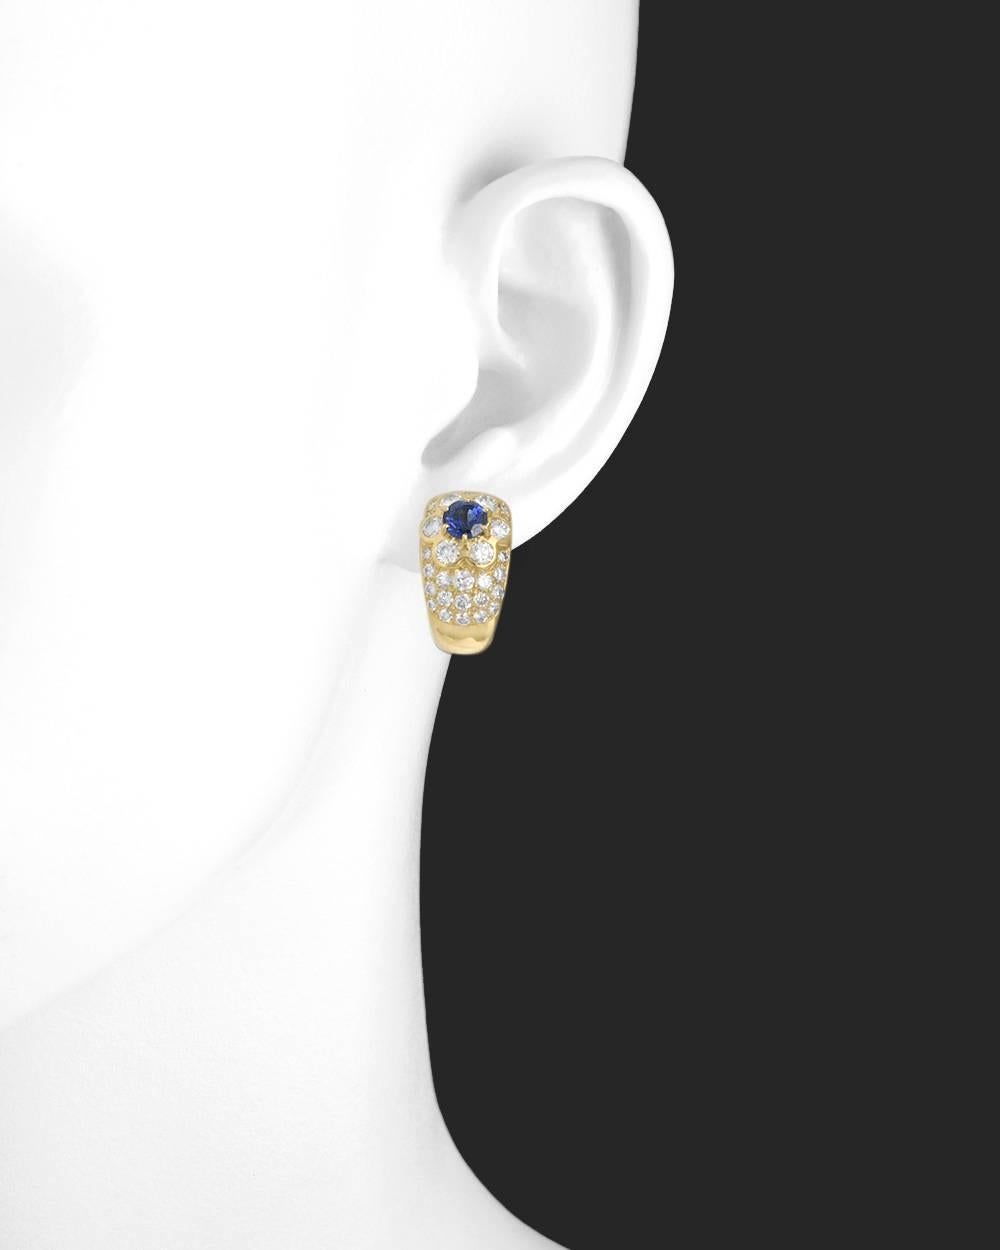 Vintage half-hoop earclips, designed with a round-cut sapphire and diamond-set flower motif at top, accented by pavé-set round brilliant-cut diamonds below,  in 18k yellow gold, numbered B3366F7 and signed 'VCA' for Van Cleef & Arpels. Sapphires